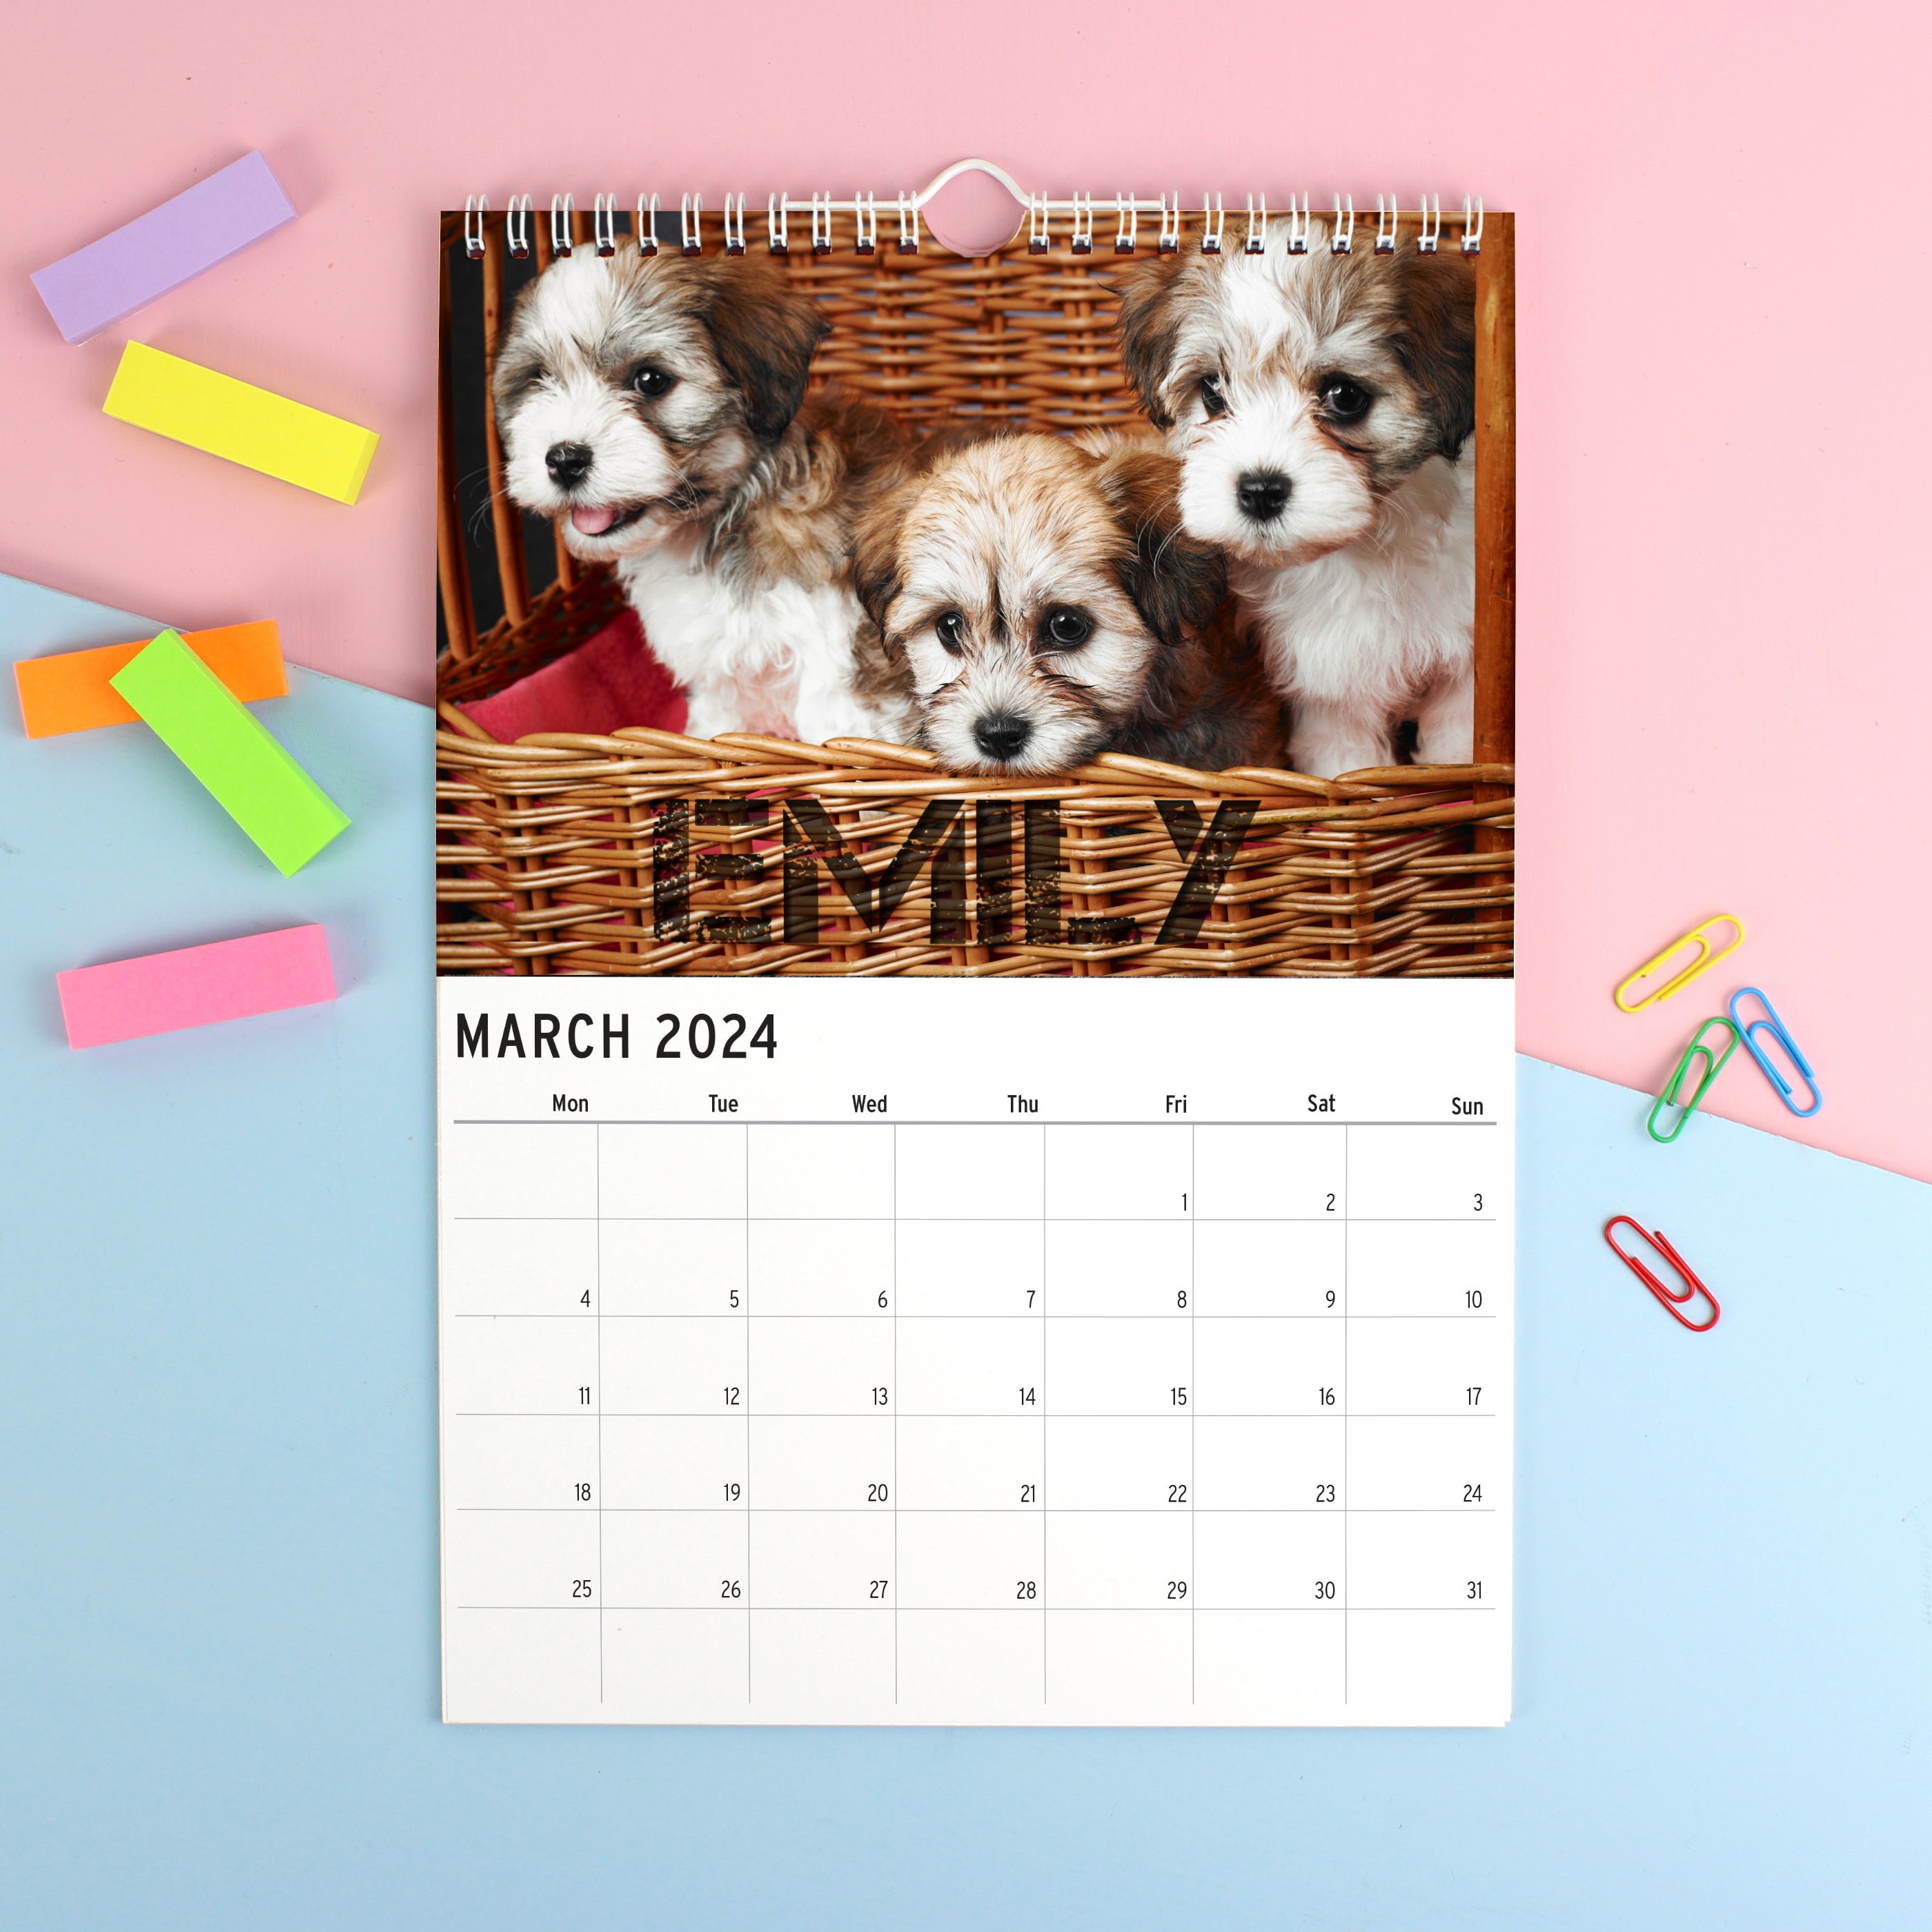 Personalised A4 Barking Mad Calendar